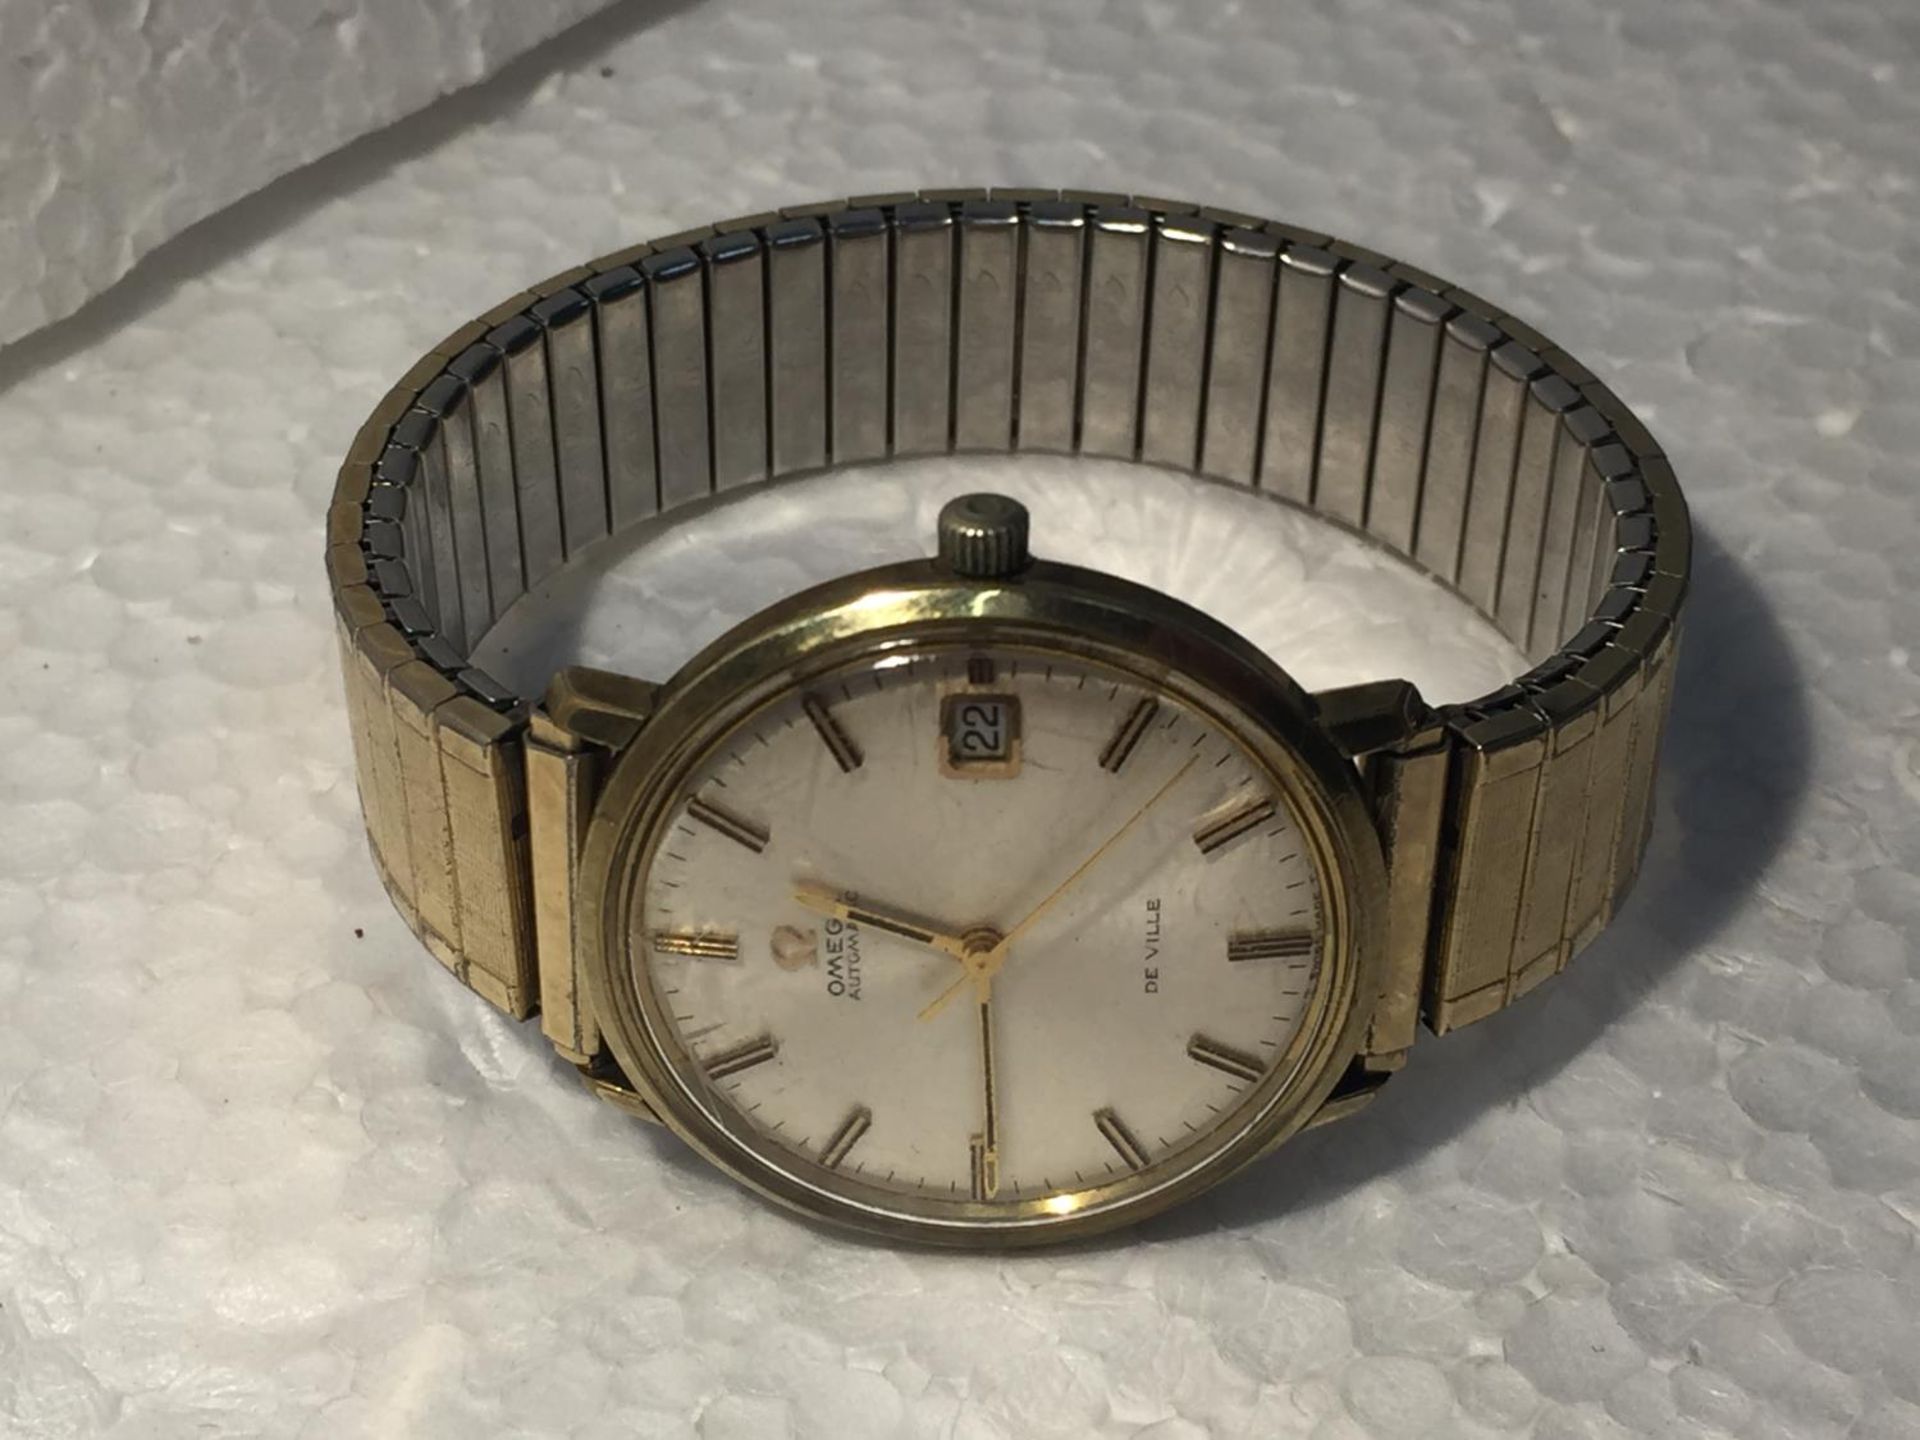 A VINTAGE OMEGA AUTOMATIC DE VILLE WATCH POSSIBLY 9CT GOLD WRIST WATCH IN WORKING ORDER WHEN - Image 7 of 7